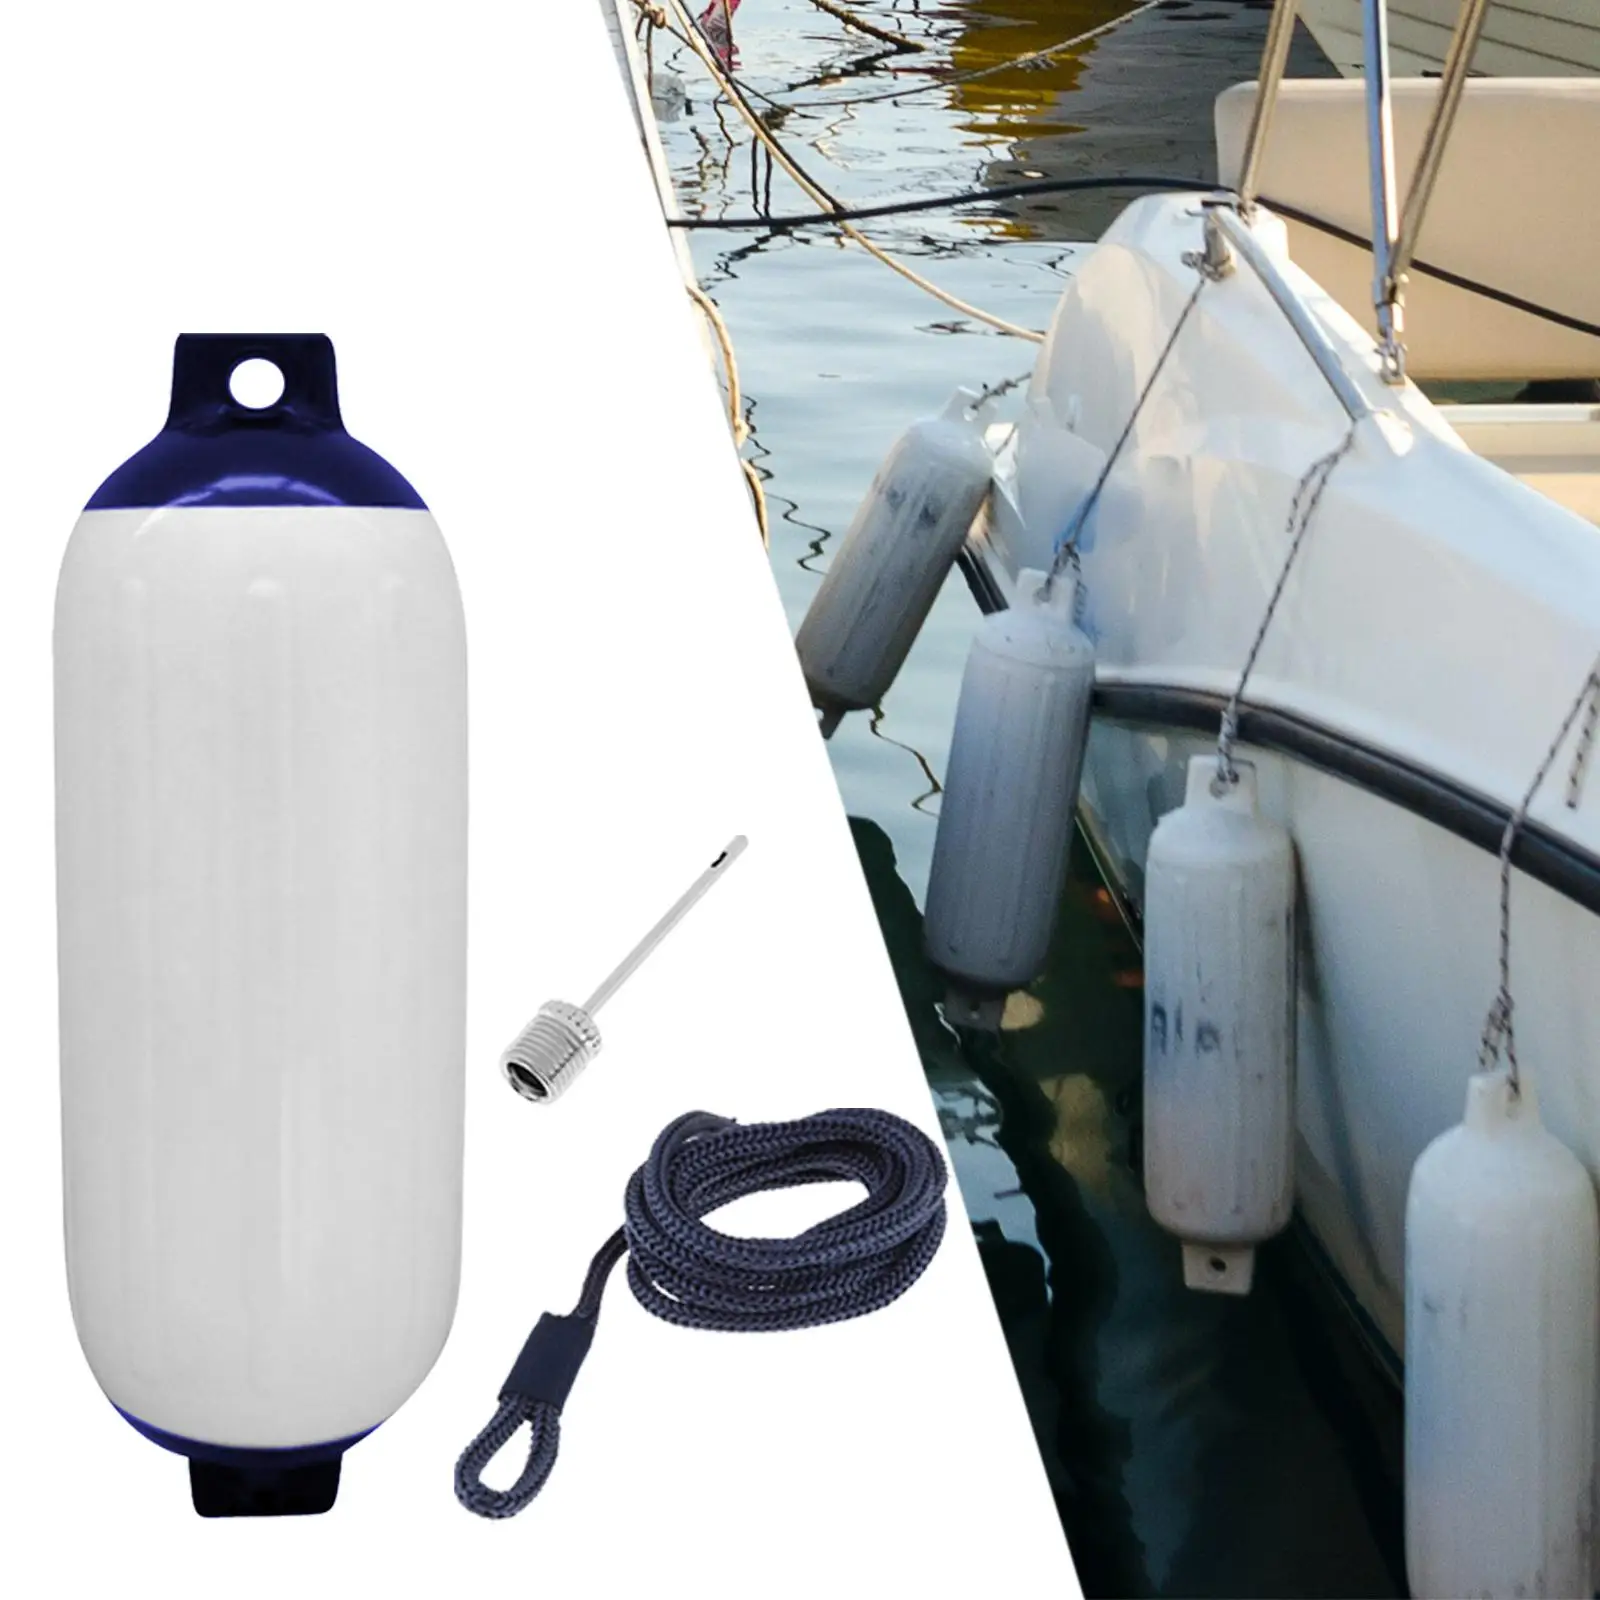 Boat Fender Kit 4x16inch Protector for Docking Fishing Boats Sailboats Boat Fender Protector with Rope and Needle